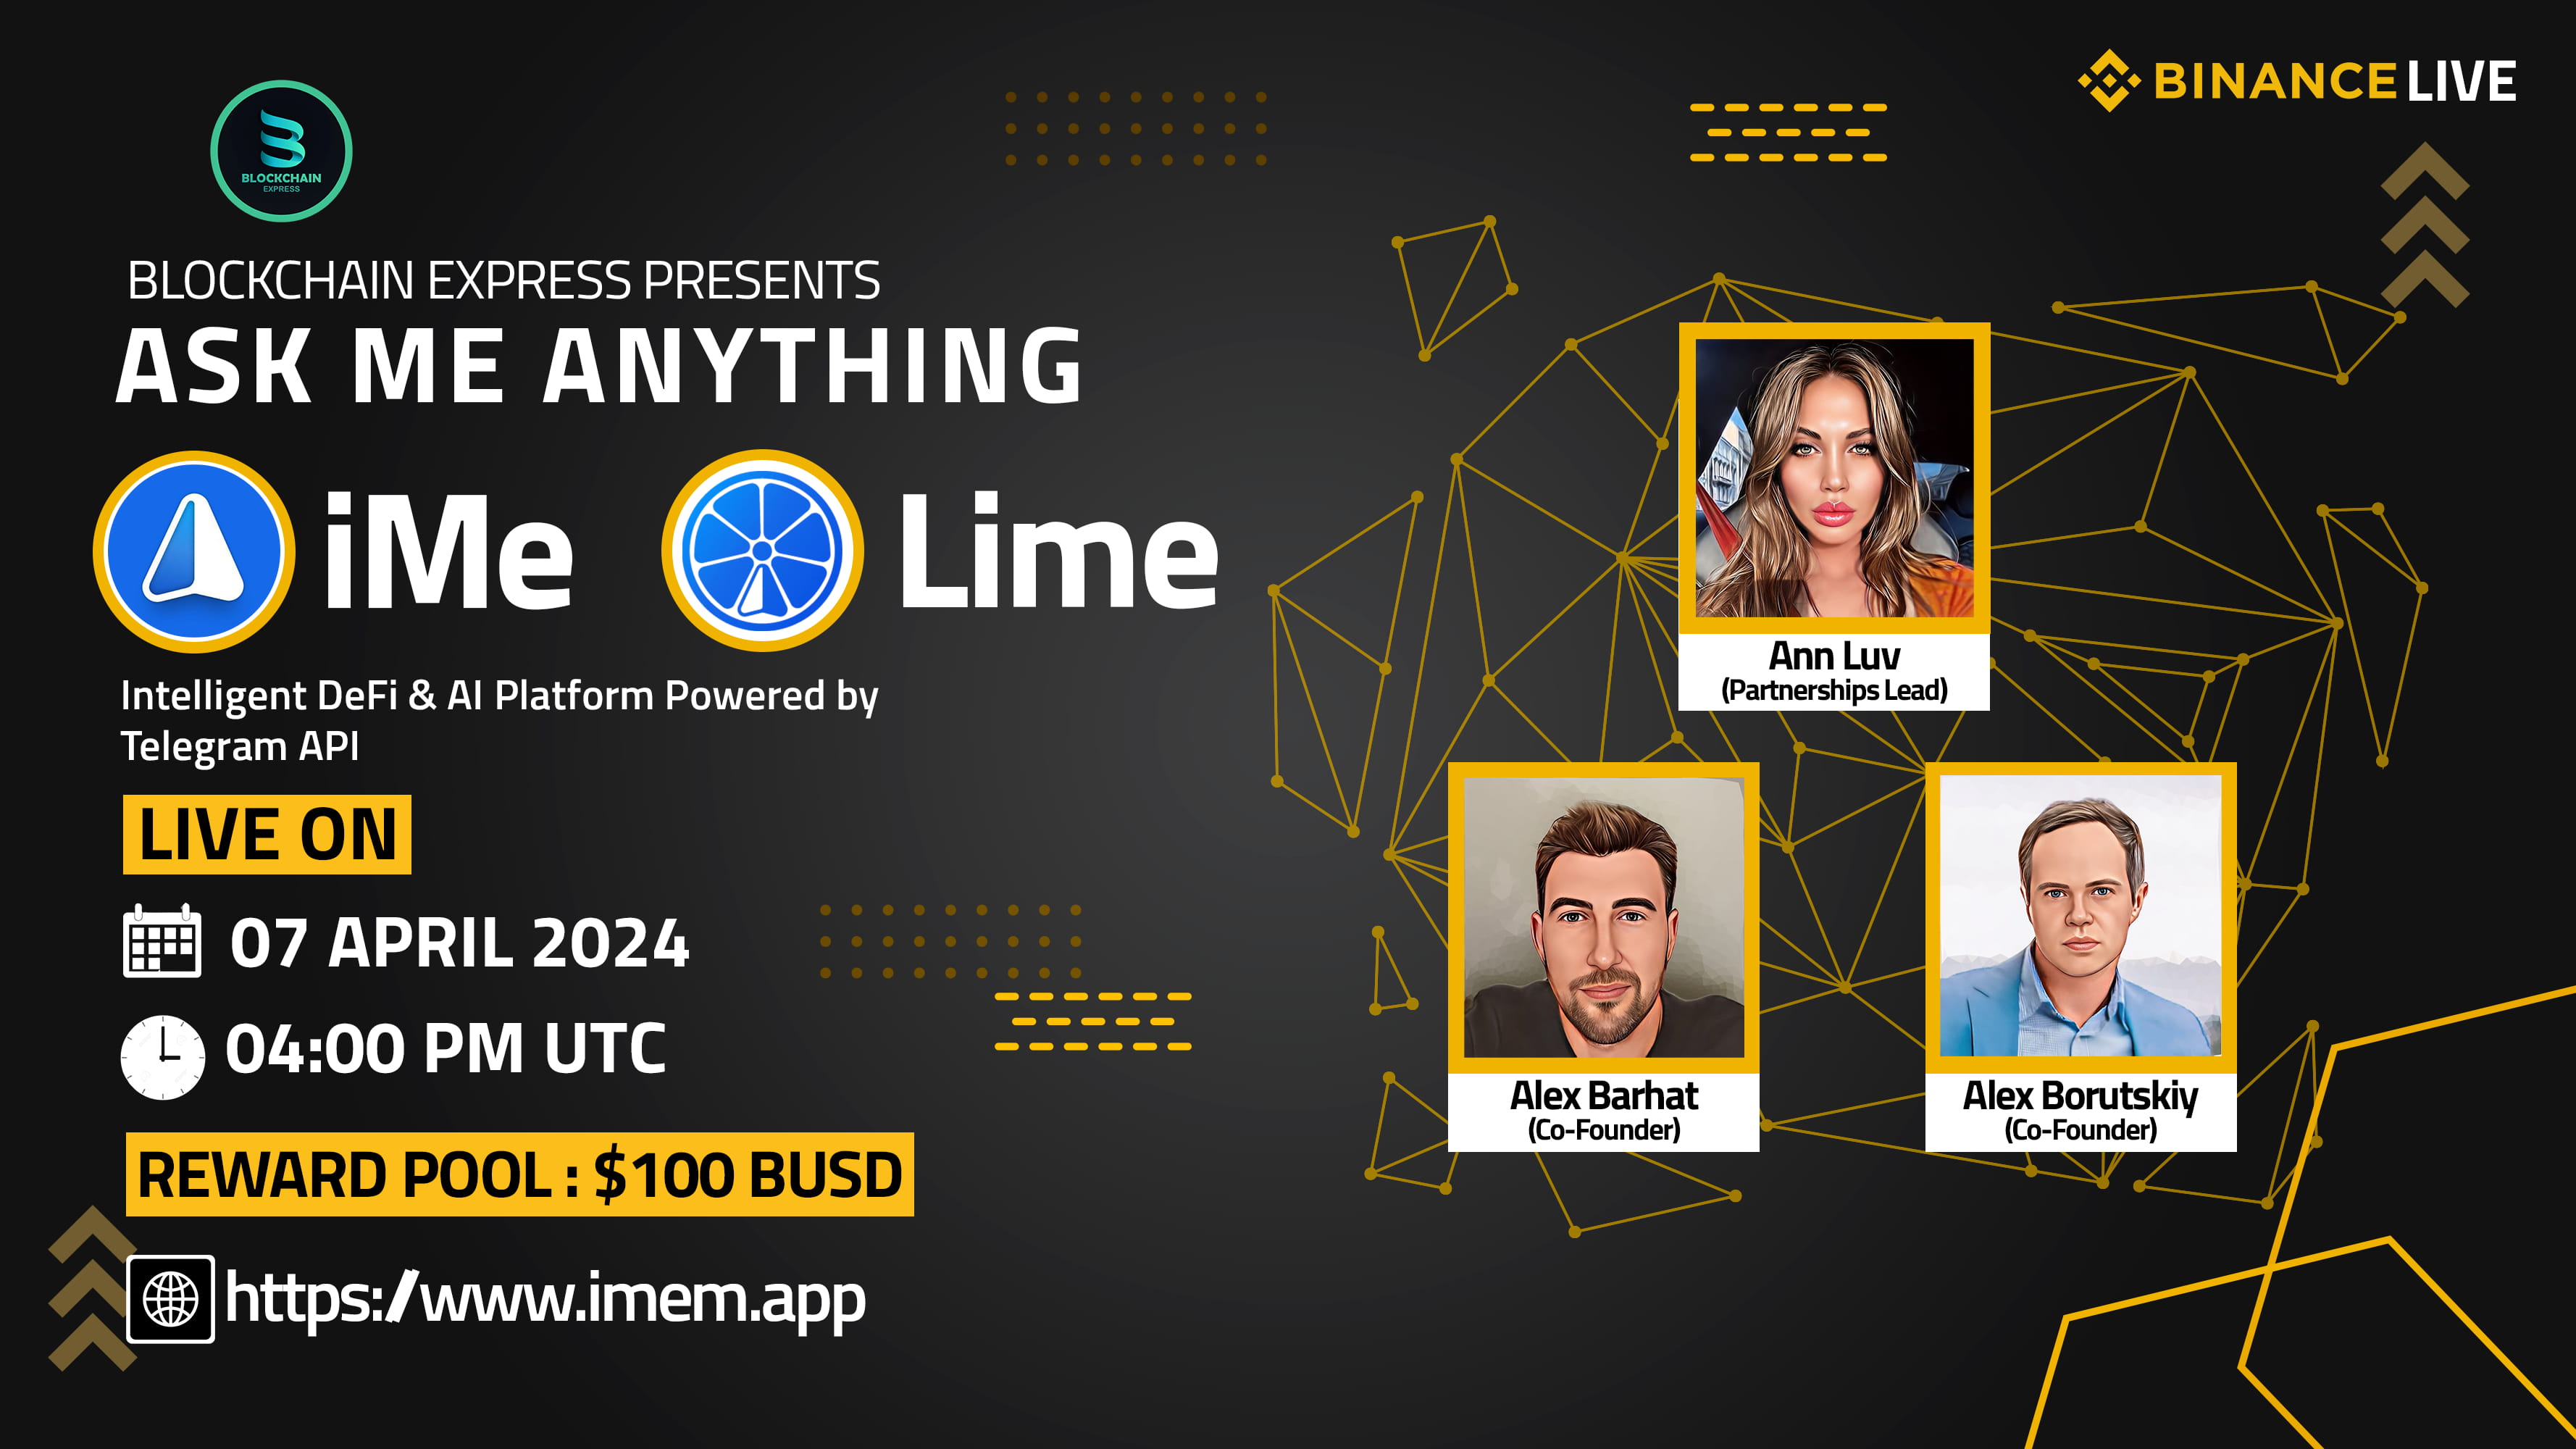 ₿lockchain Express will be hosting anAMA session with" iMe & Lime "